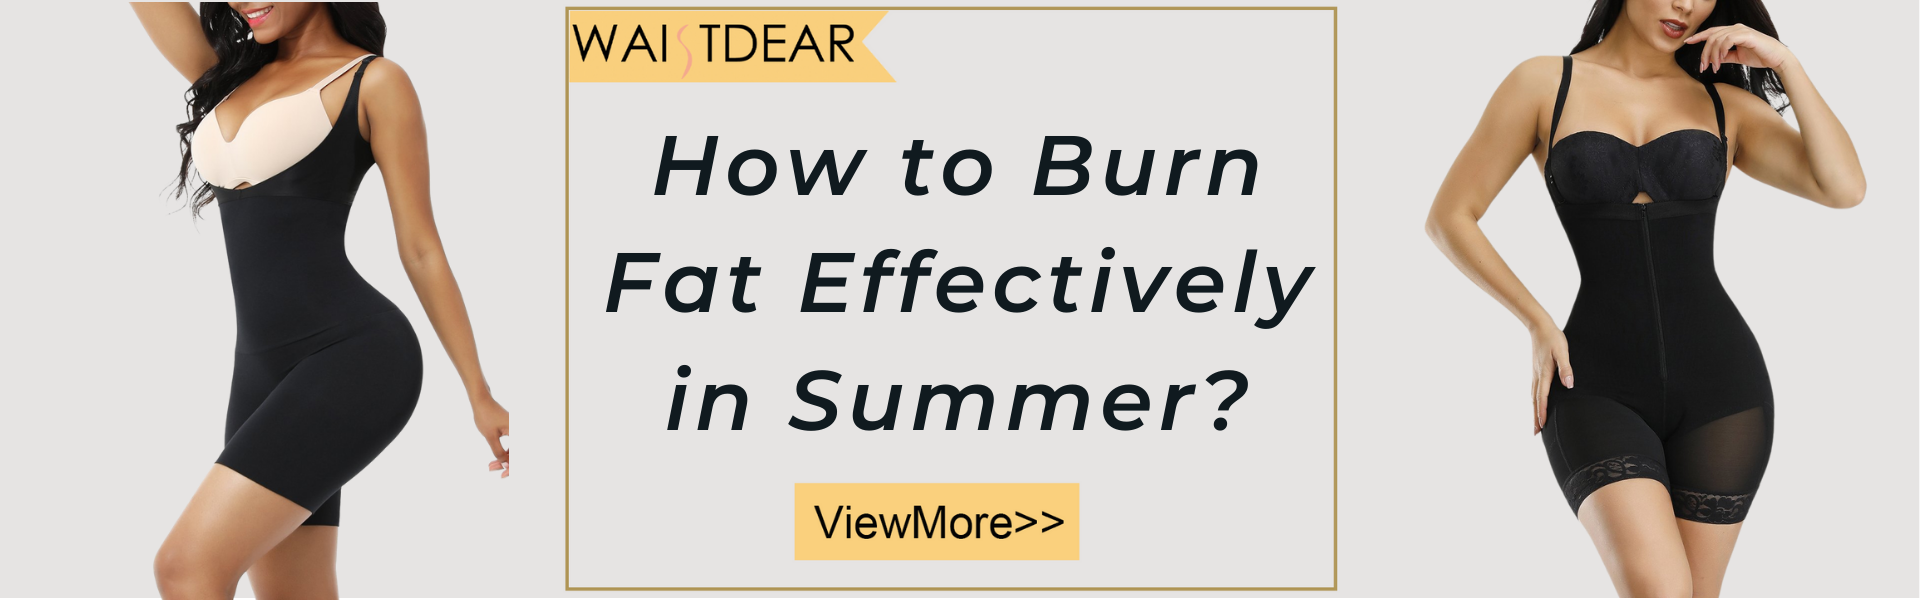 How to Burn Fat Effectively in Summer?